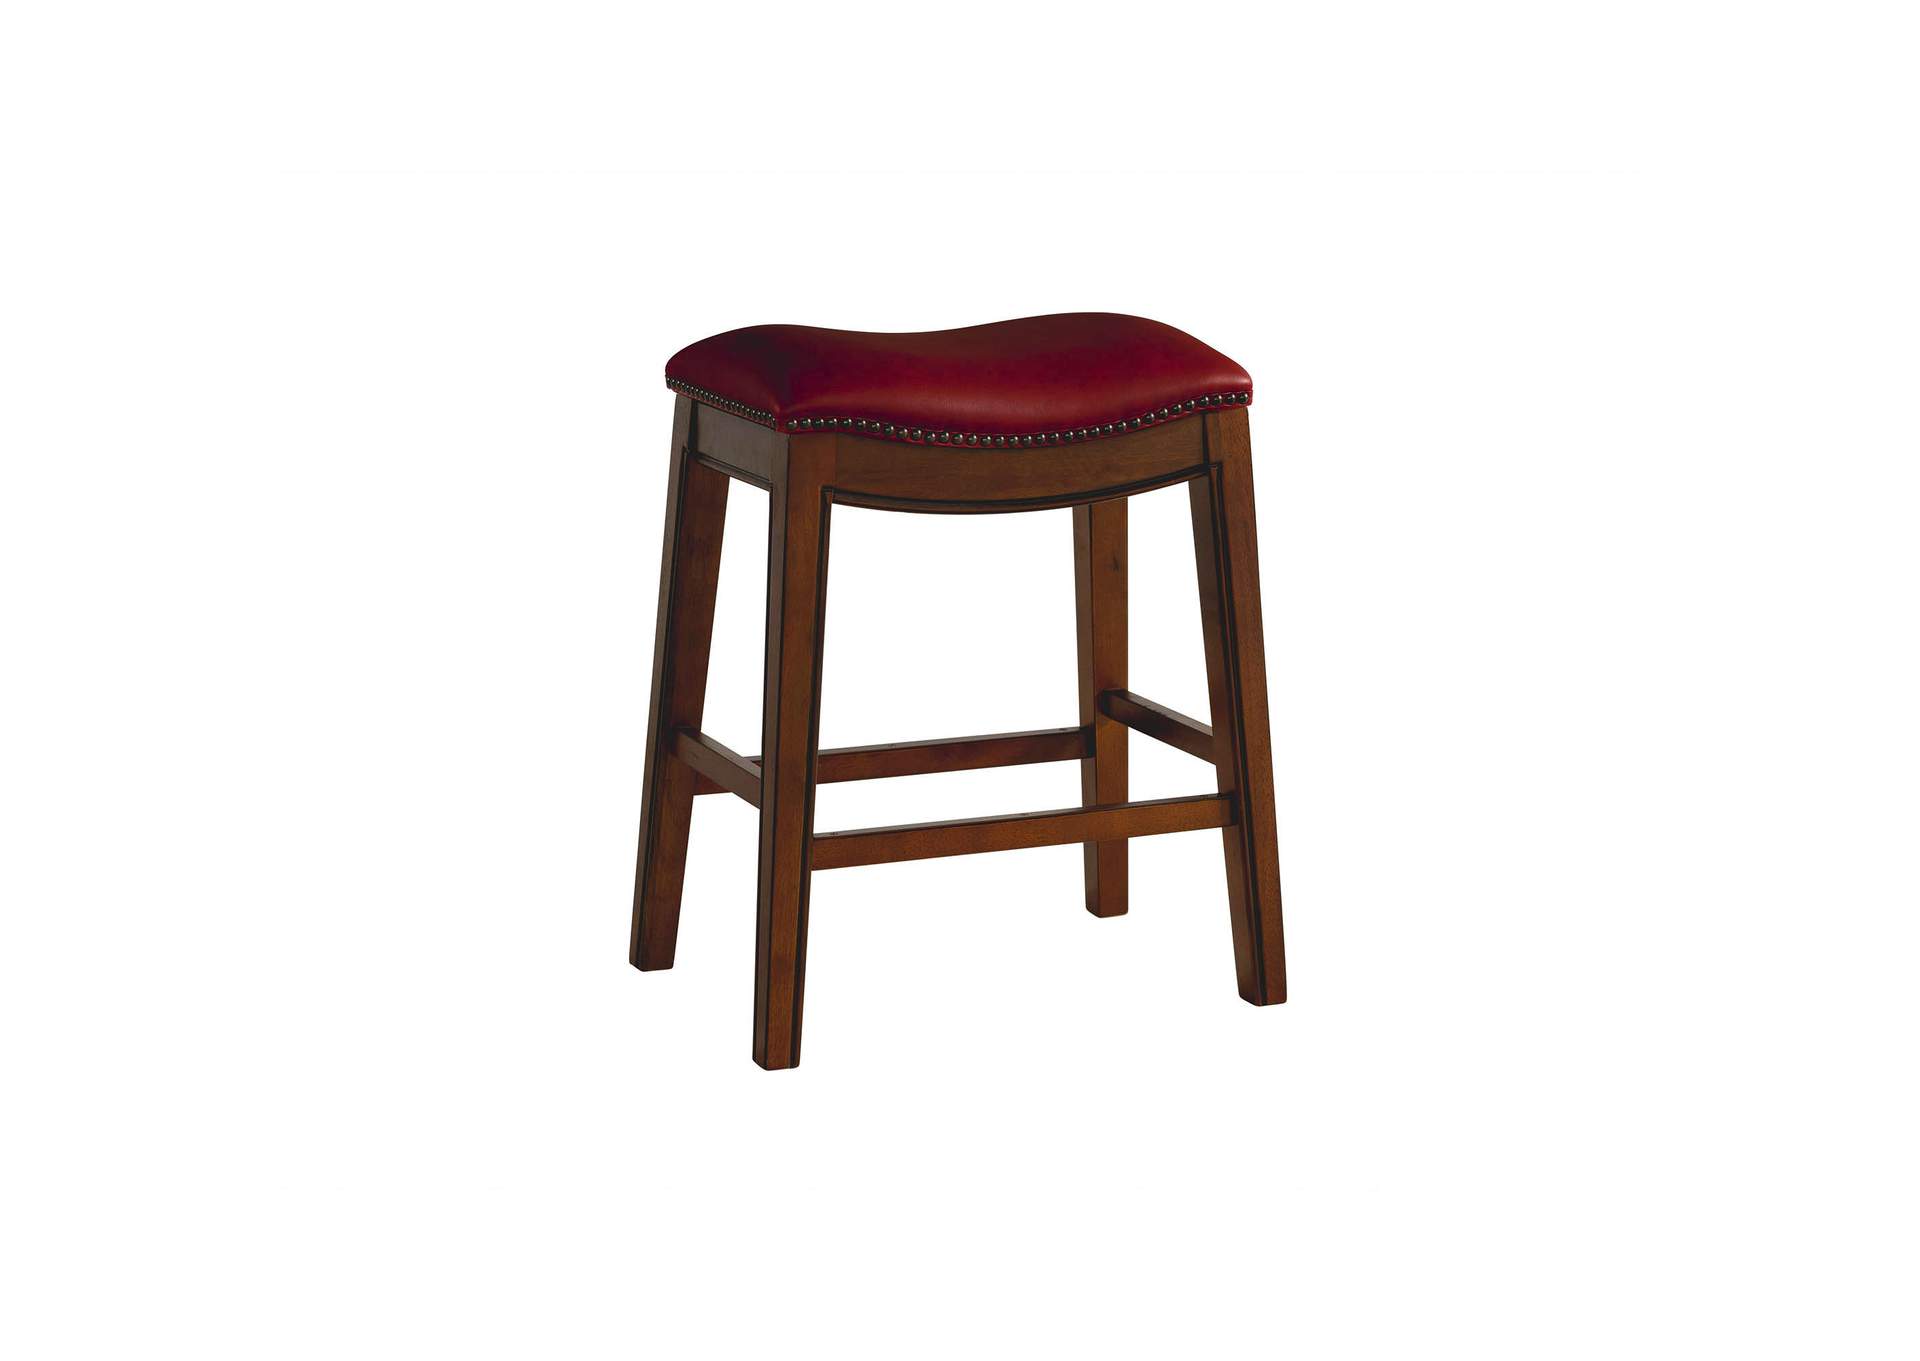 Fiesta Counter Stool 24 - Red,Elements